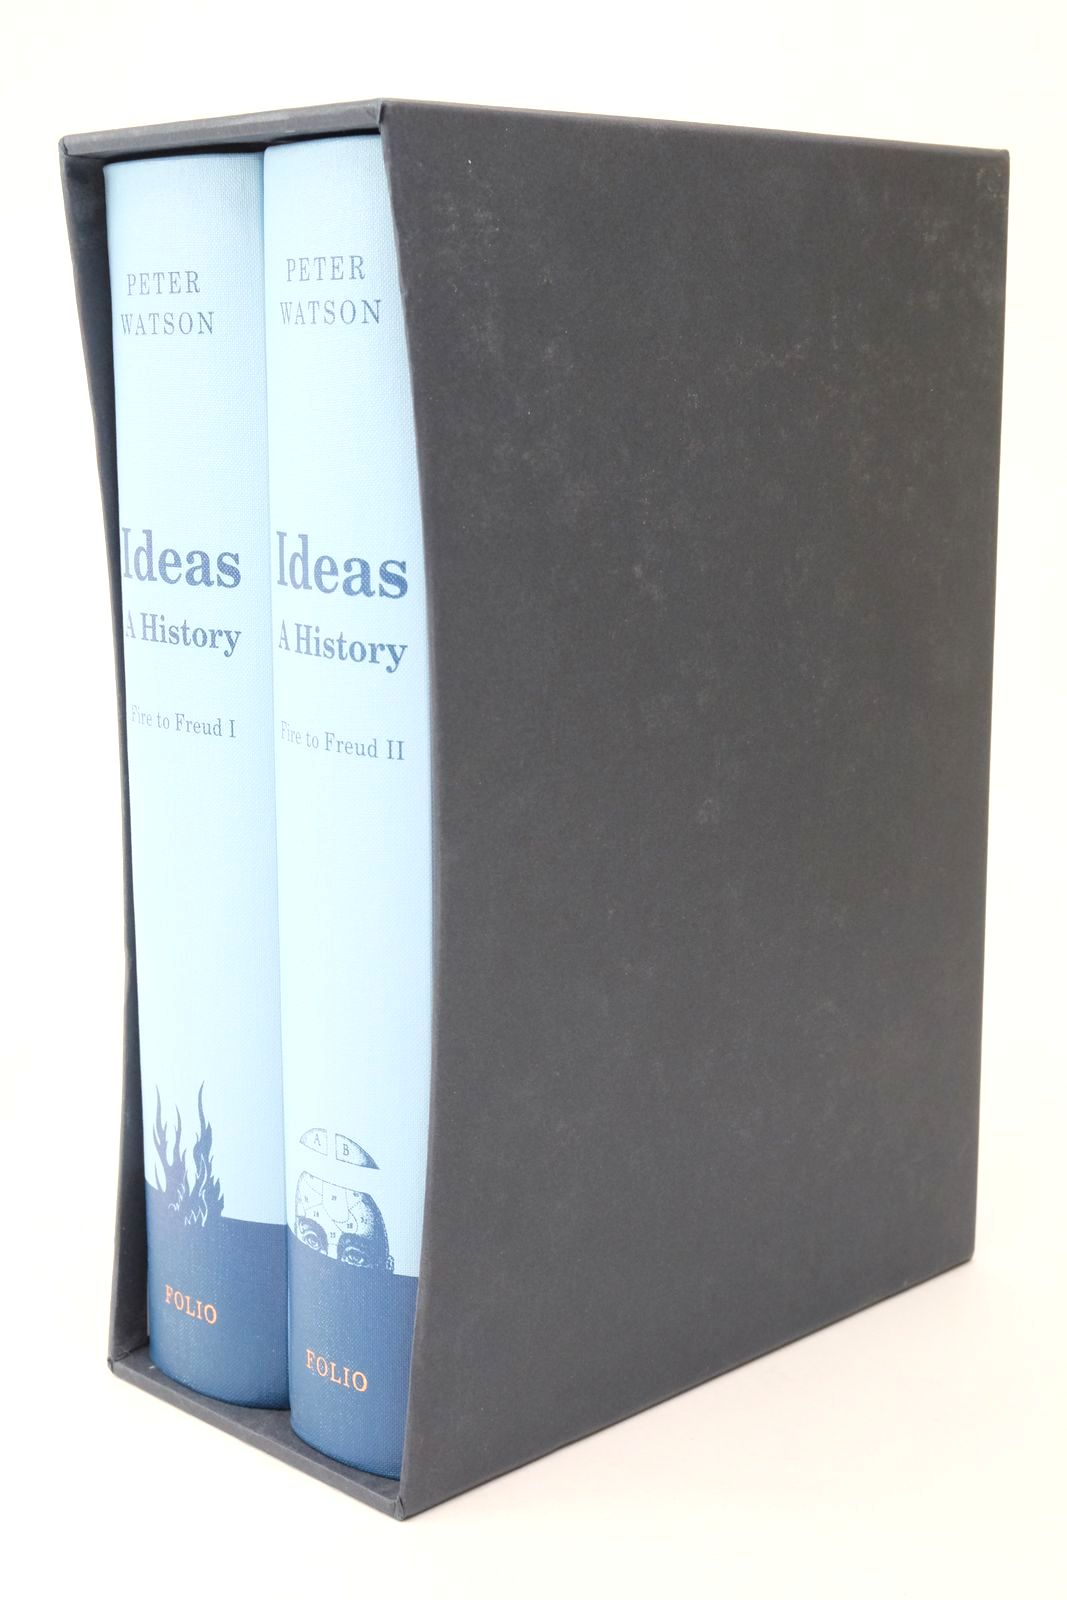 Photo of IDEAS: A HISTORY FROM FIRE TO FREUD VOLUMES I & II written by Watson, Peter published by Folio Society (STOCK CODE: 1322515)  for sale by Stella & Rose's Books